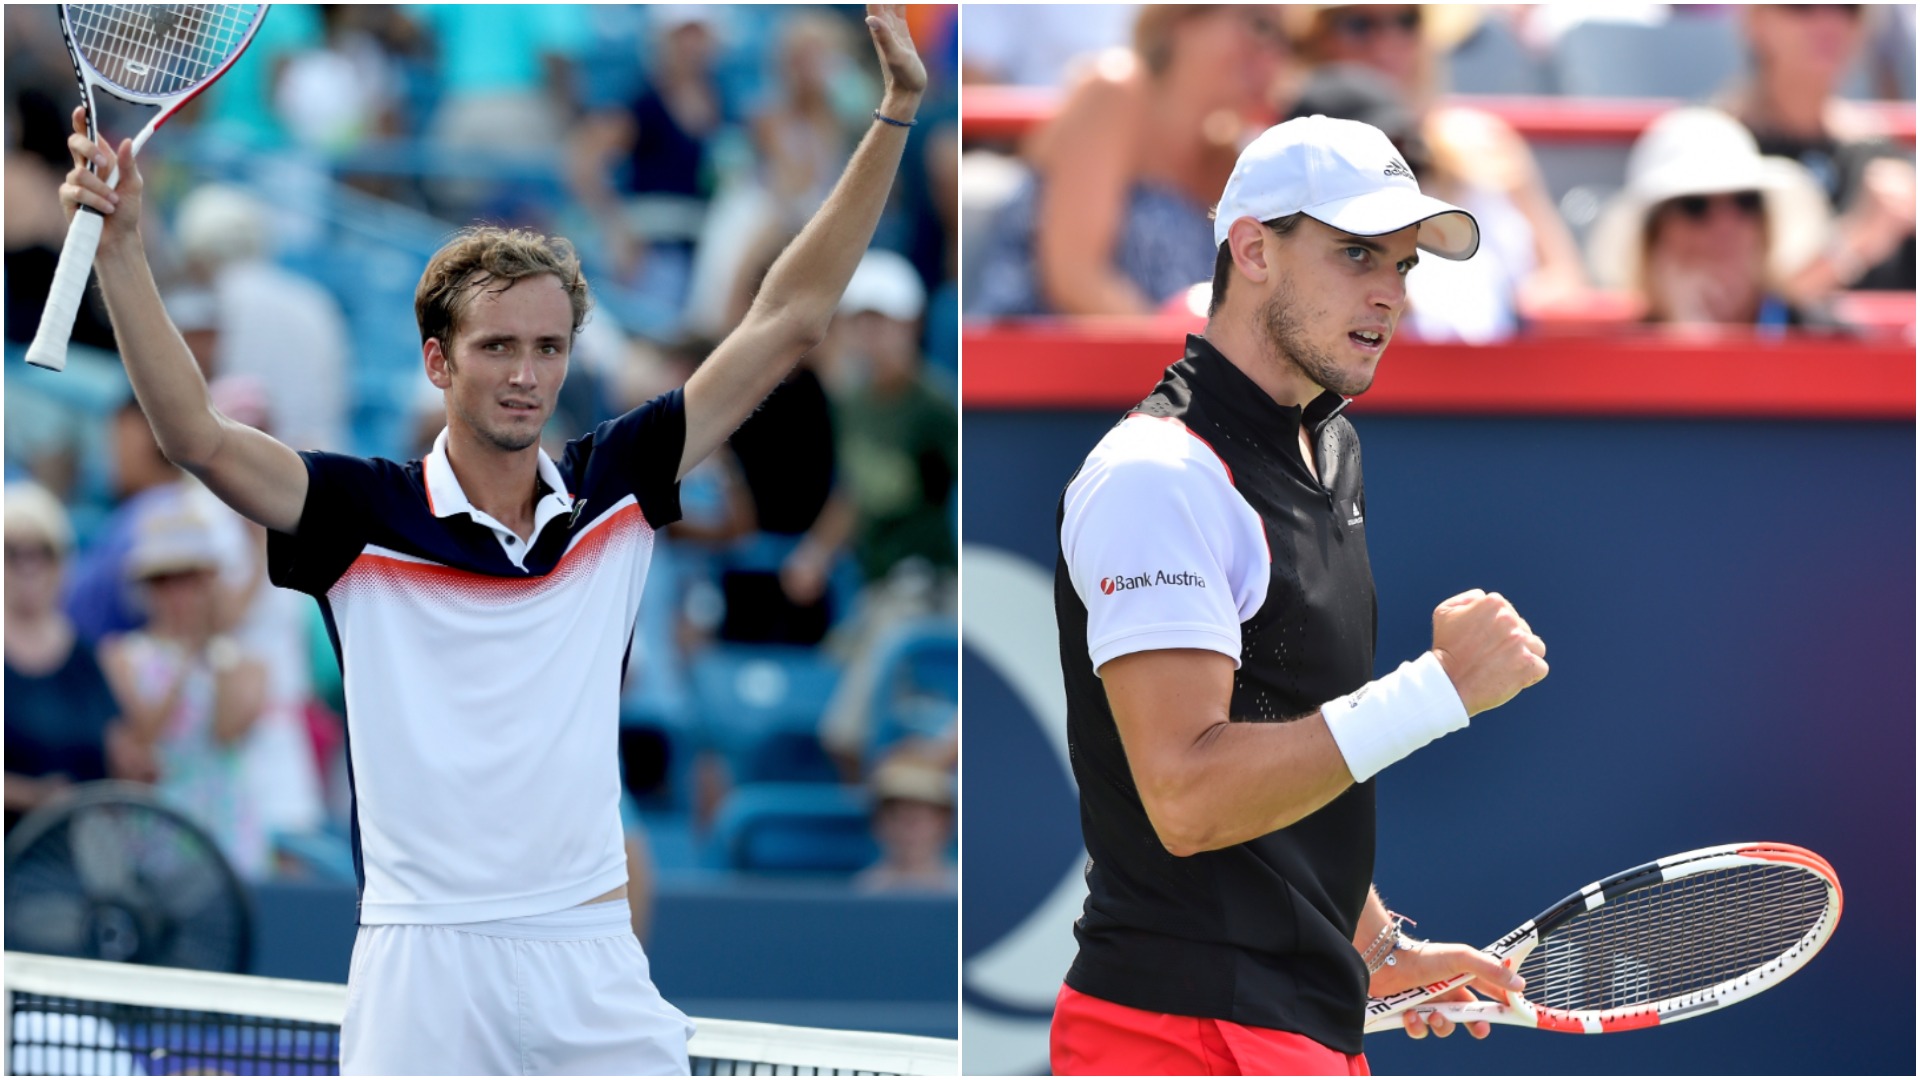 Ahead of the final major of the year, we look at the non-big three contenders to reach the final at the US Open.